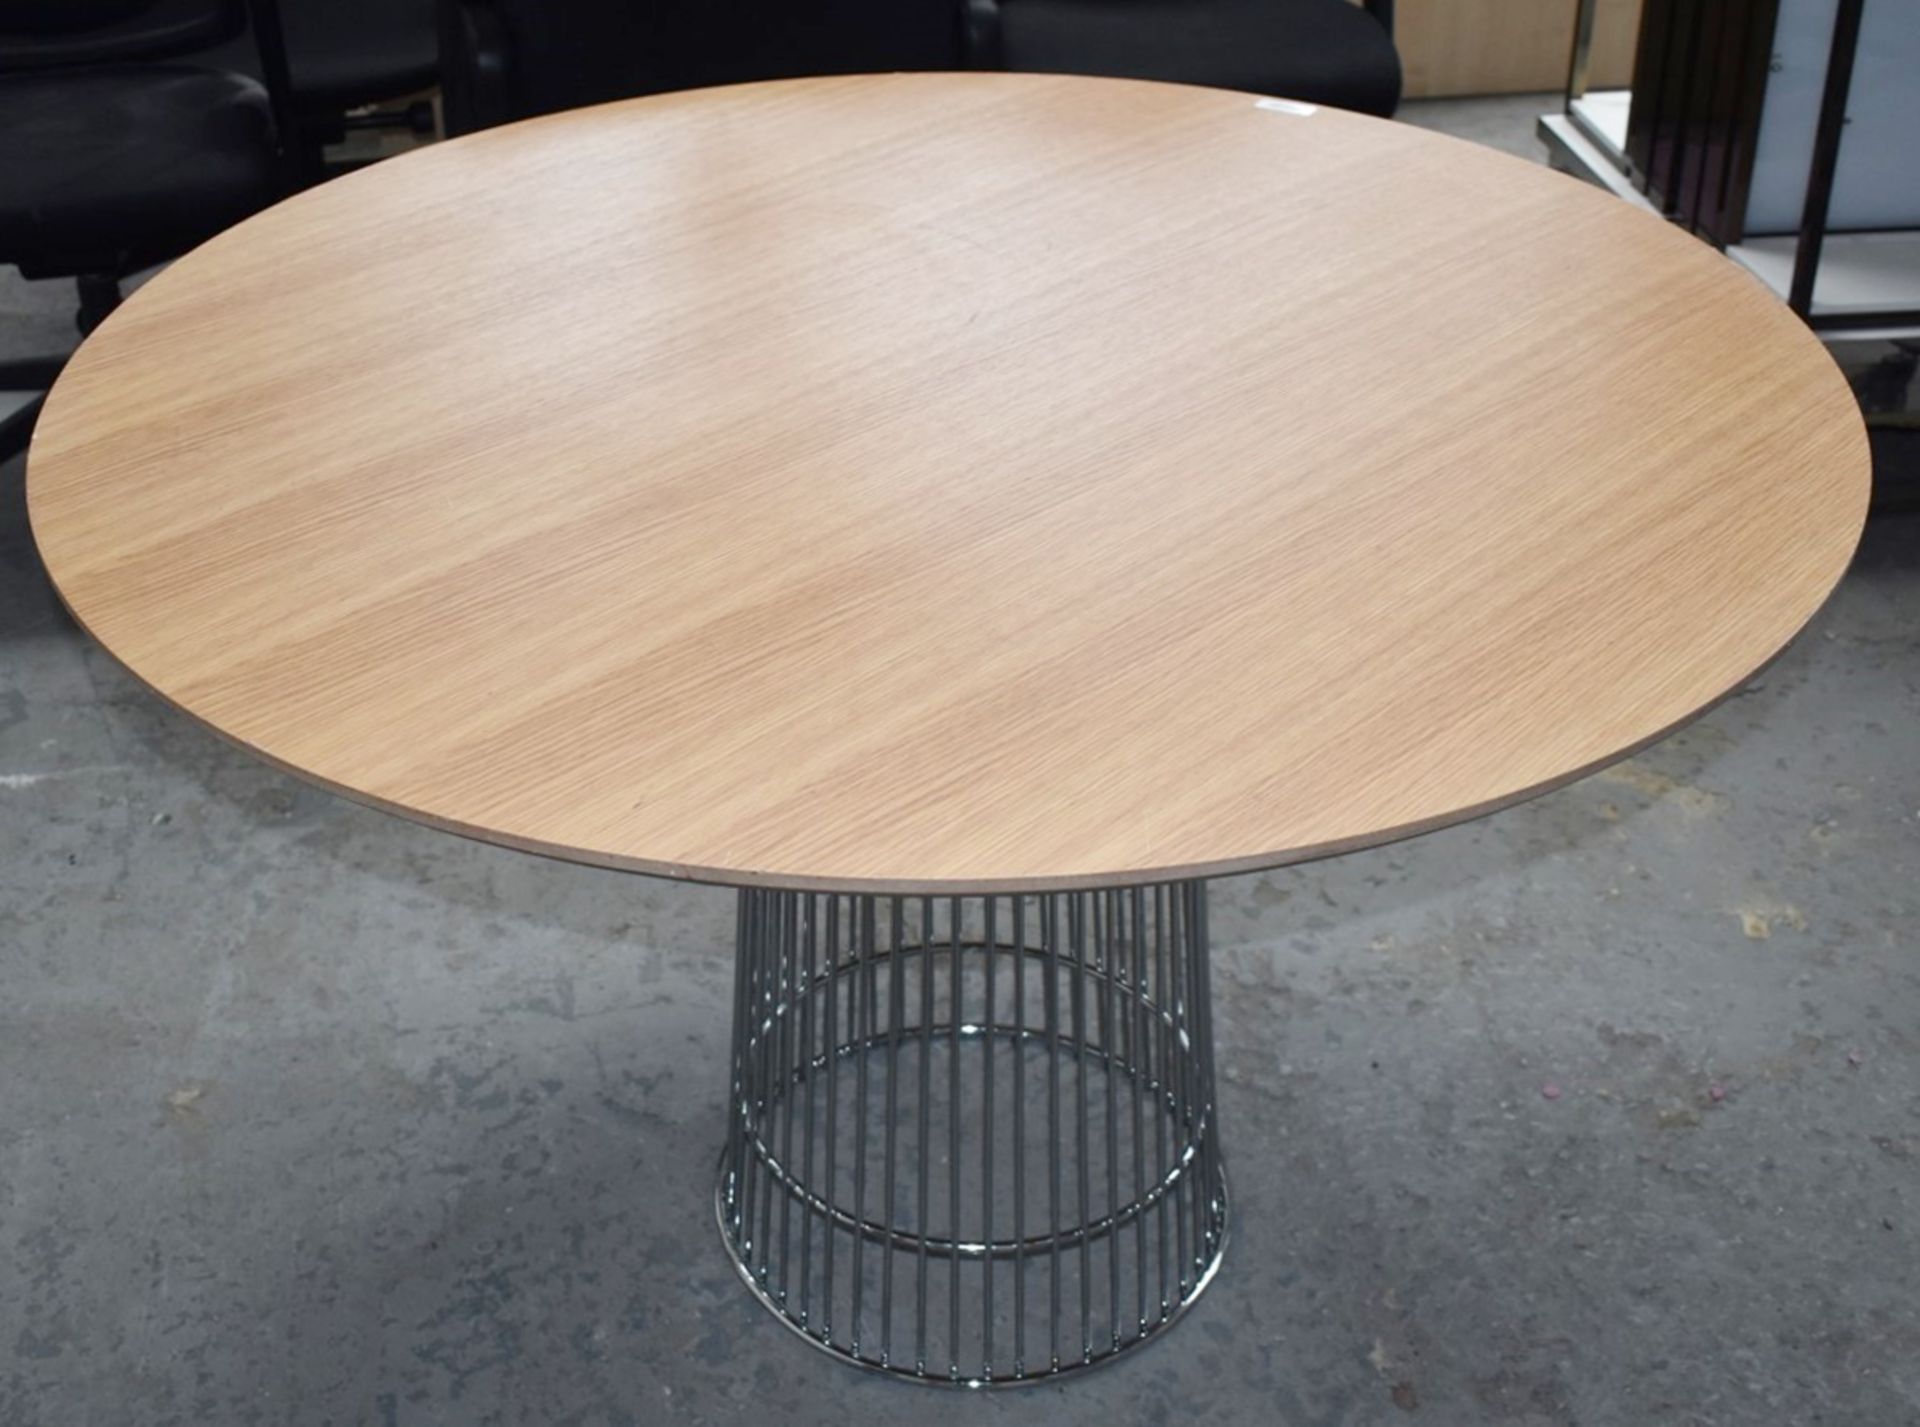 1 x Temahome Dining Table With a Large Round Table Top and Stylish Chrome Base - 150cm Diameter - Image 2 of 13